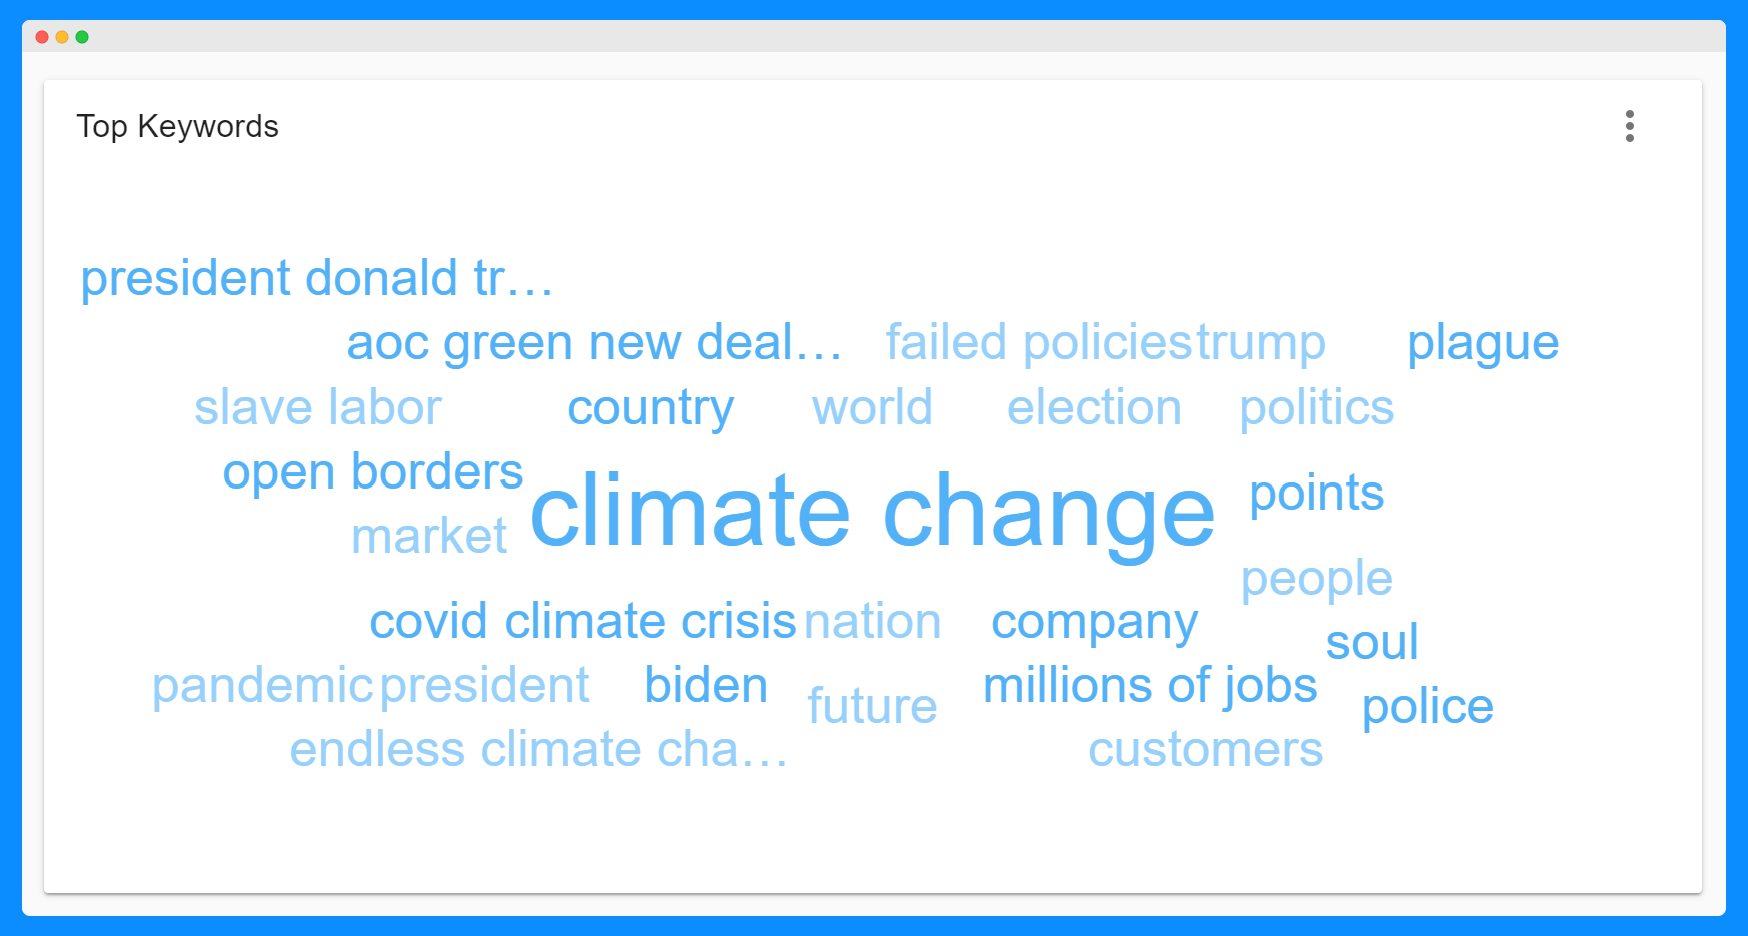 Climate Crisis 2 - Keywords in Meltwater Query